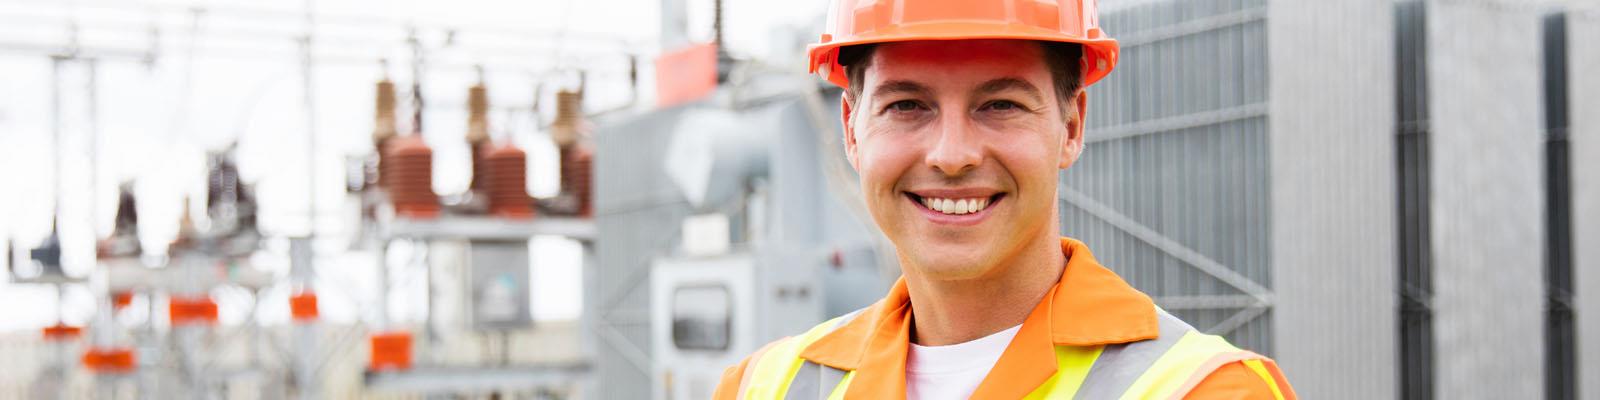 Electrical engineer standing in front of equipment wearing hard hat